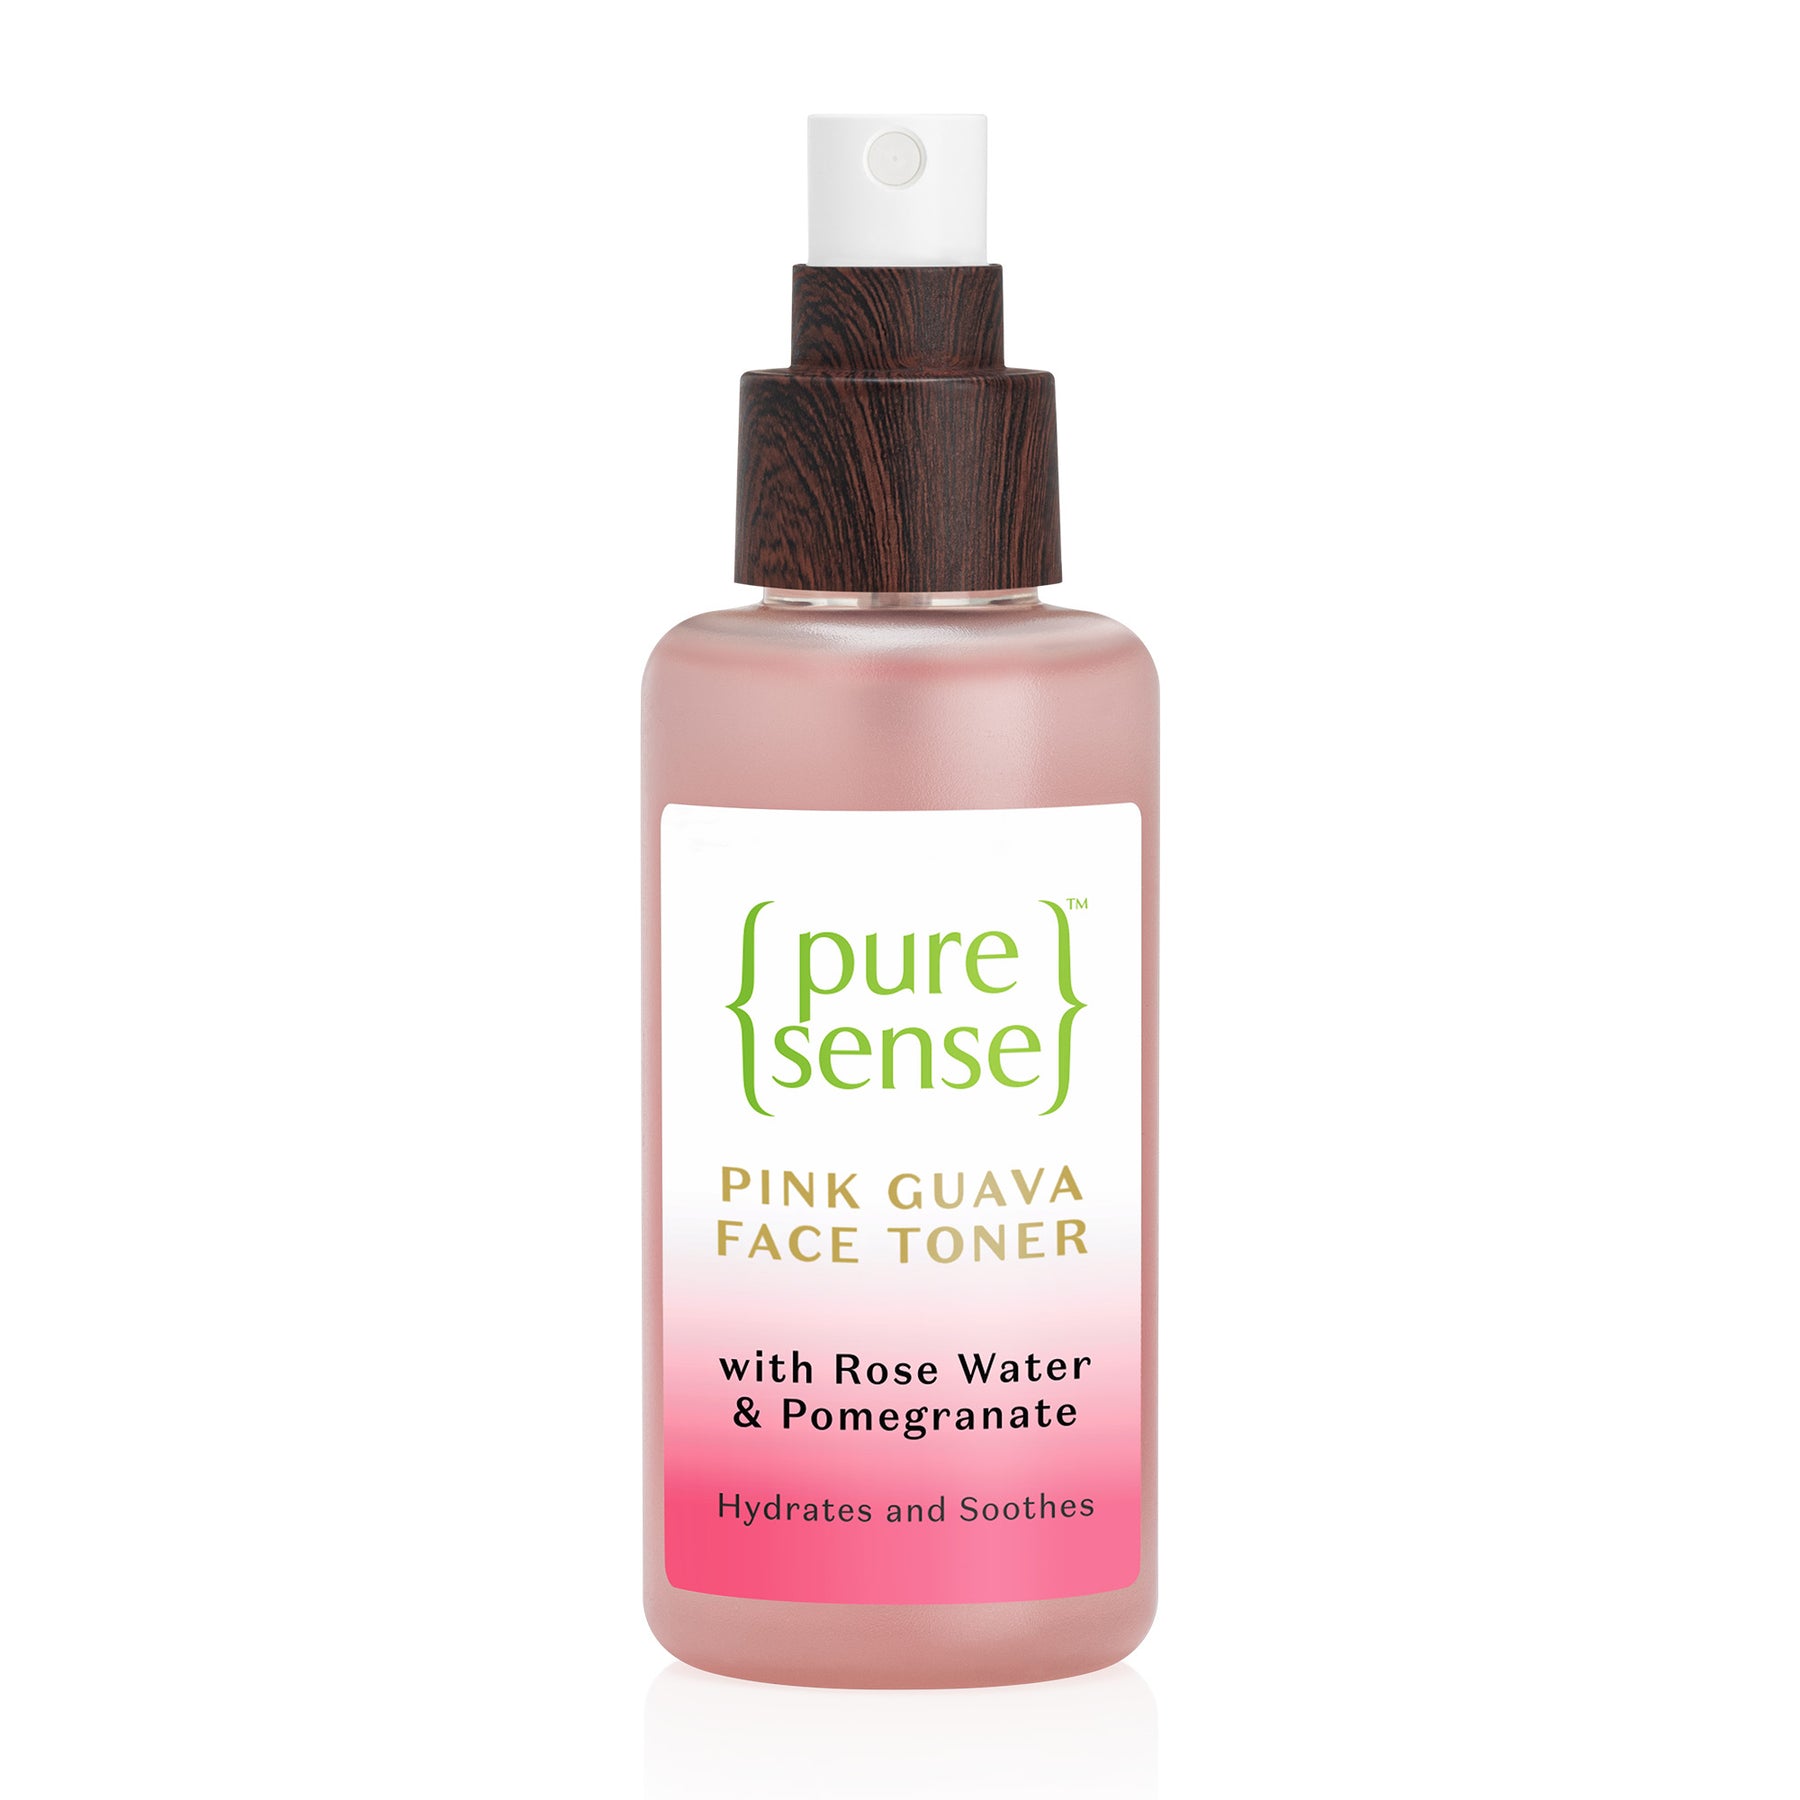 Pink Guava Face Toner | From the makers of Parachute Advansed | 100ml